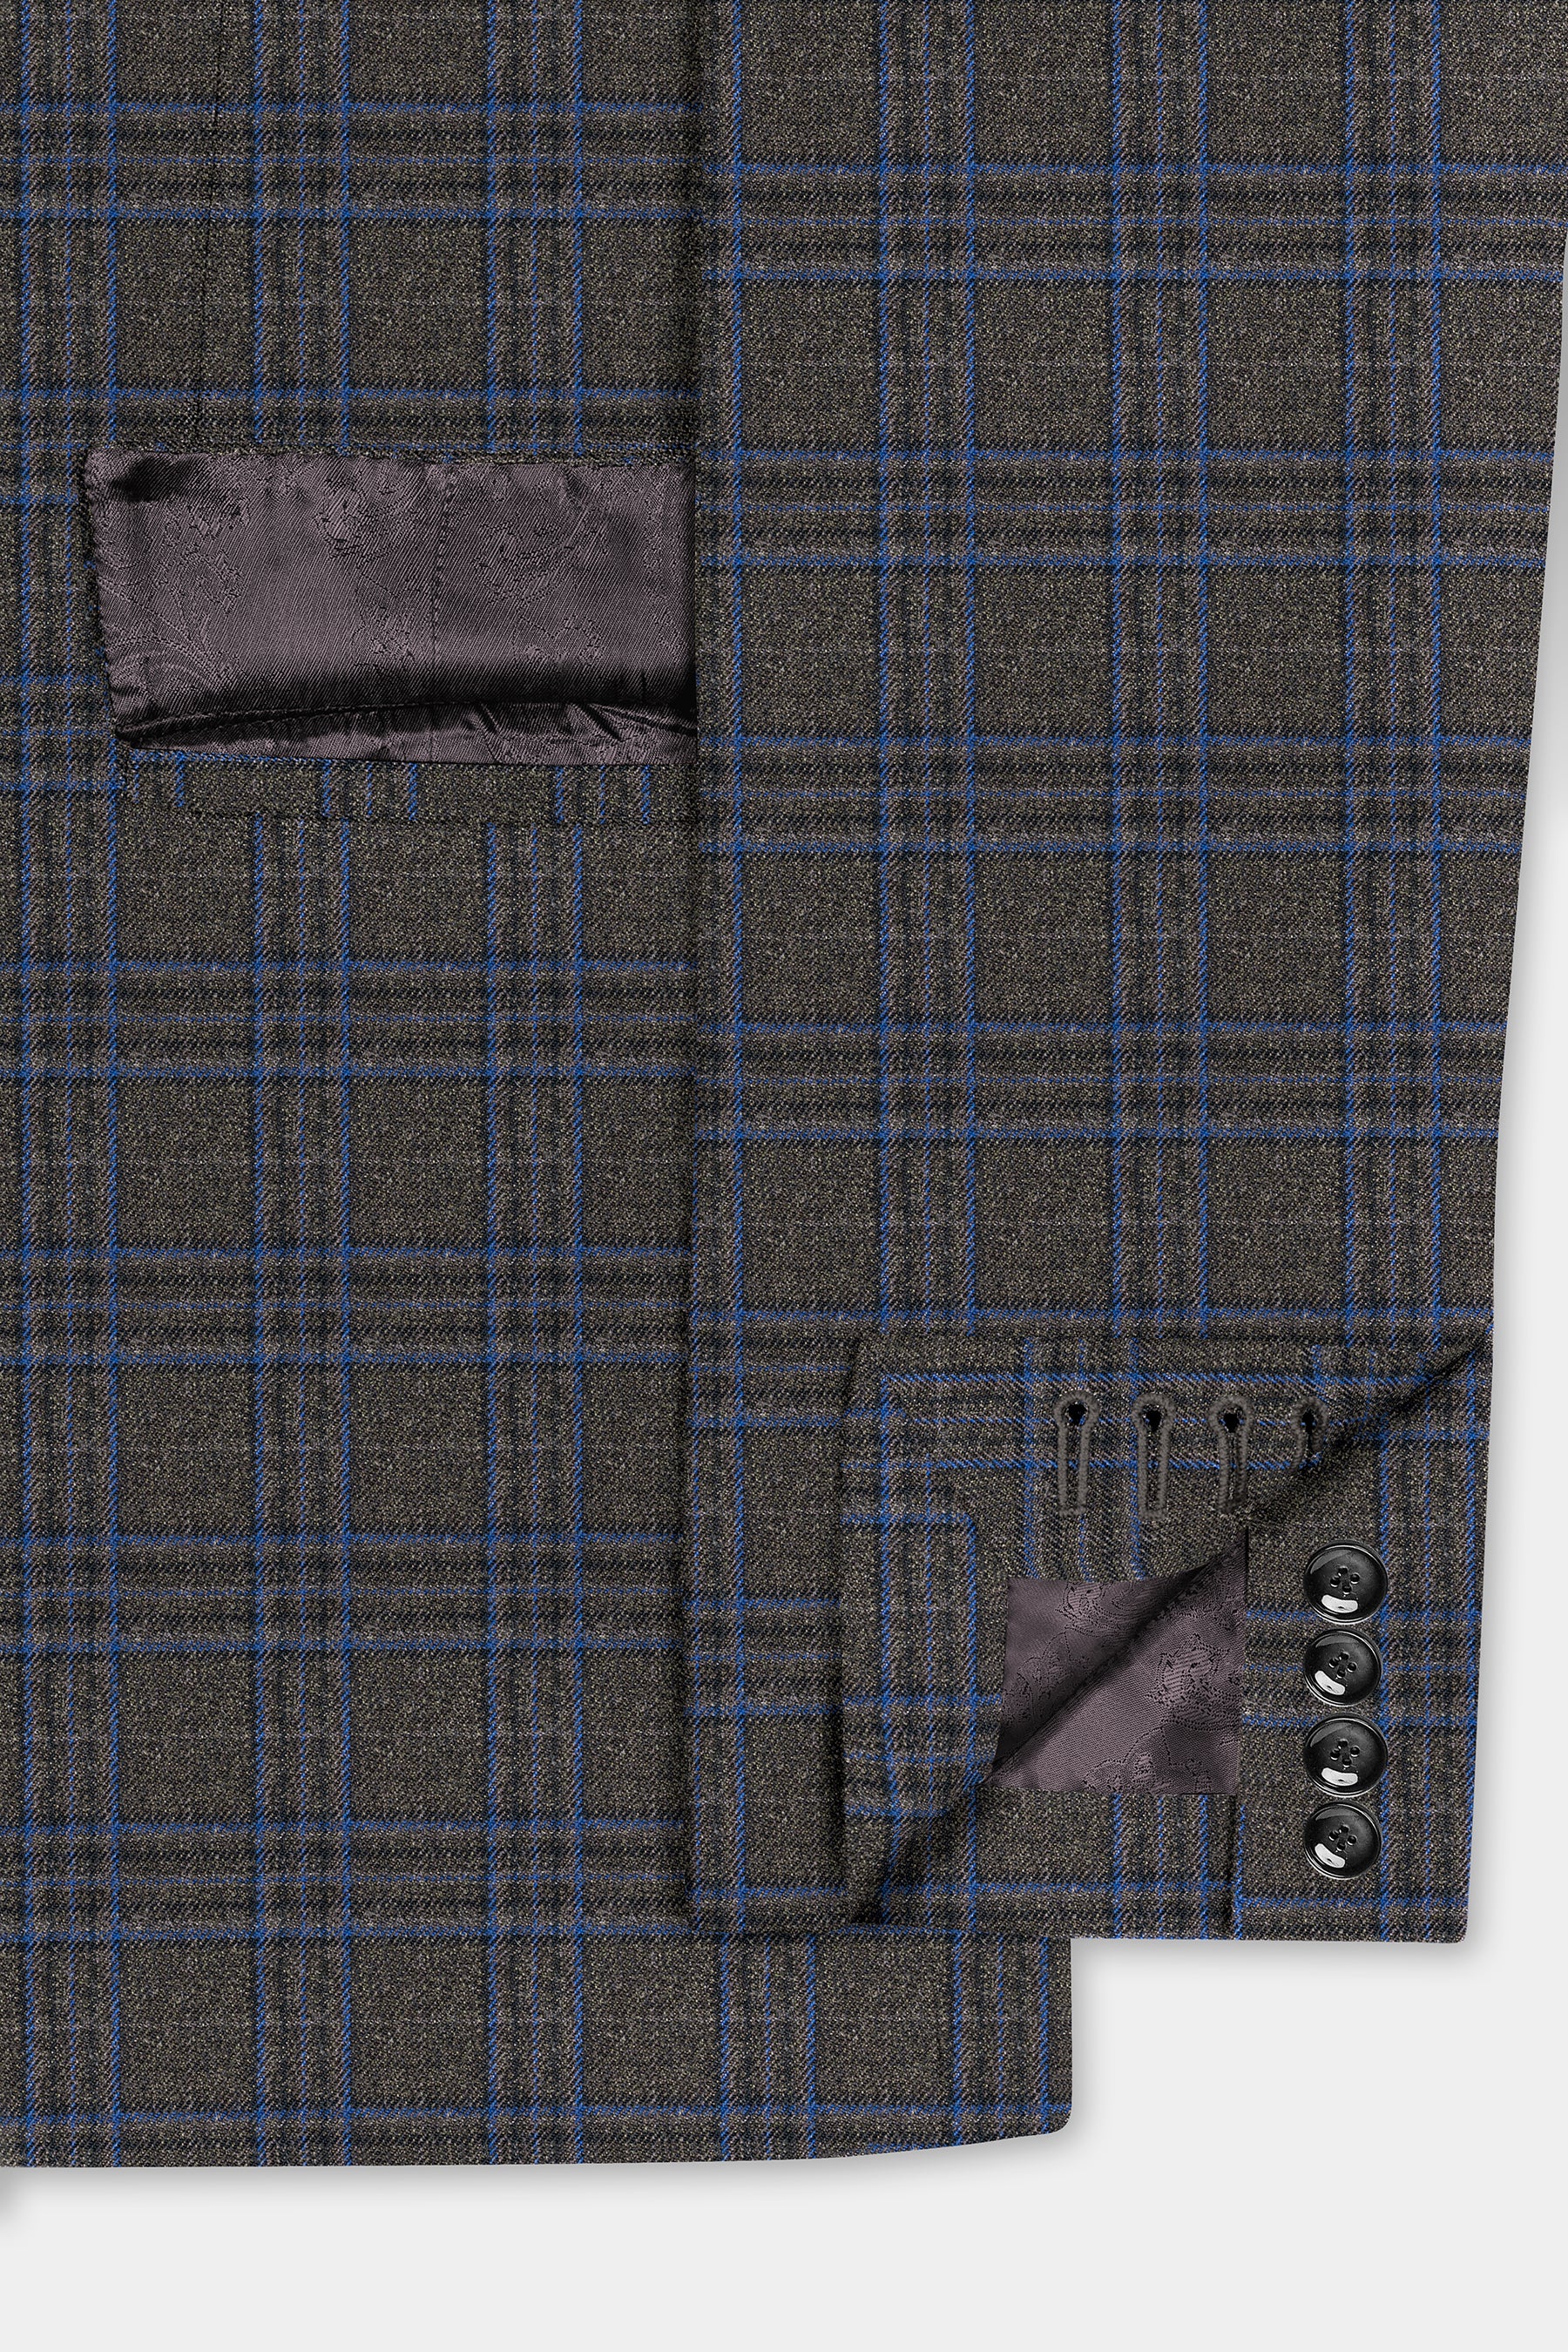 Shark Gray with Chambray Blue Plaid Tweed Suit